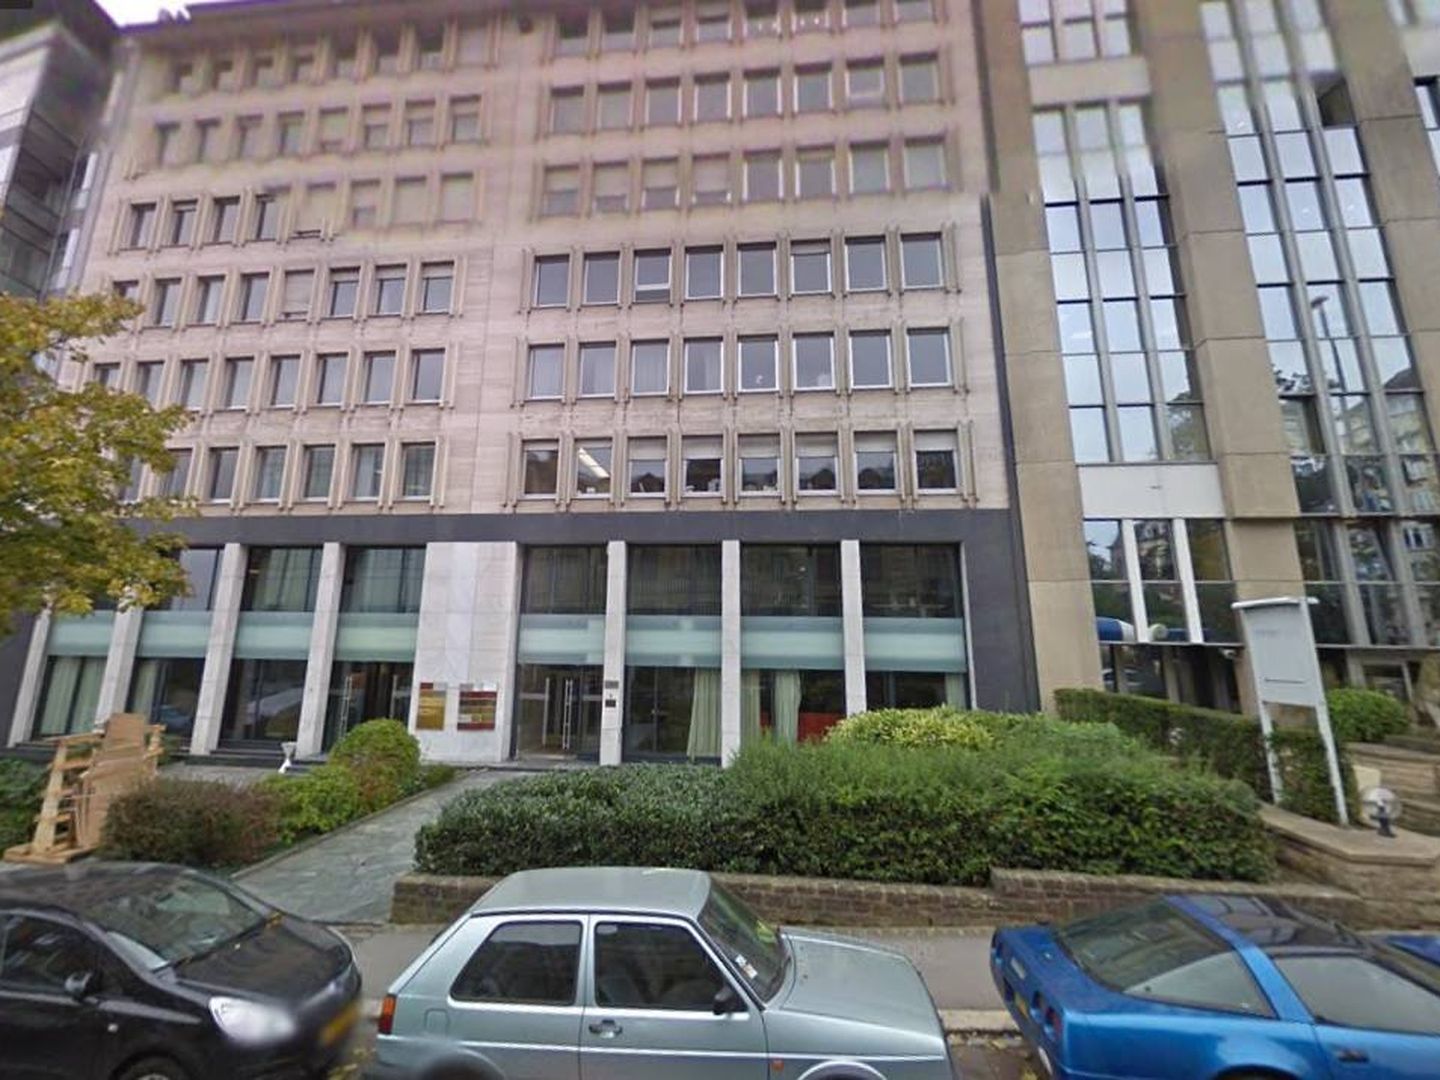 Despacho Luxembourg International Consulting SA. (Google Maps)